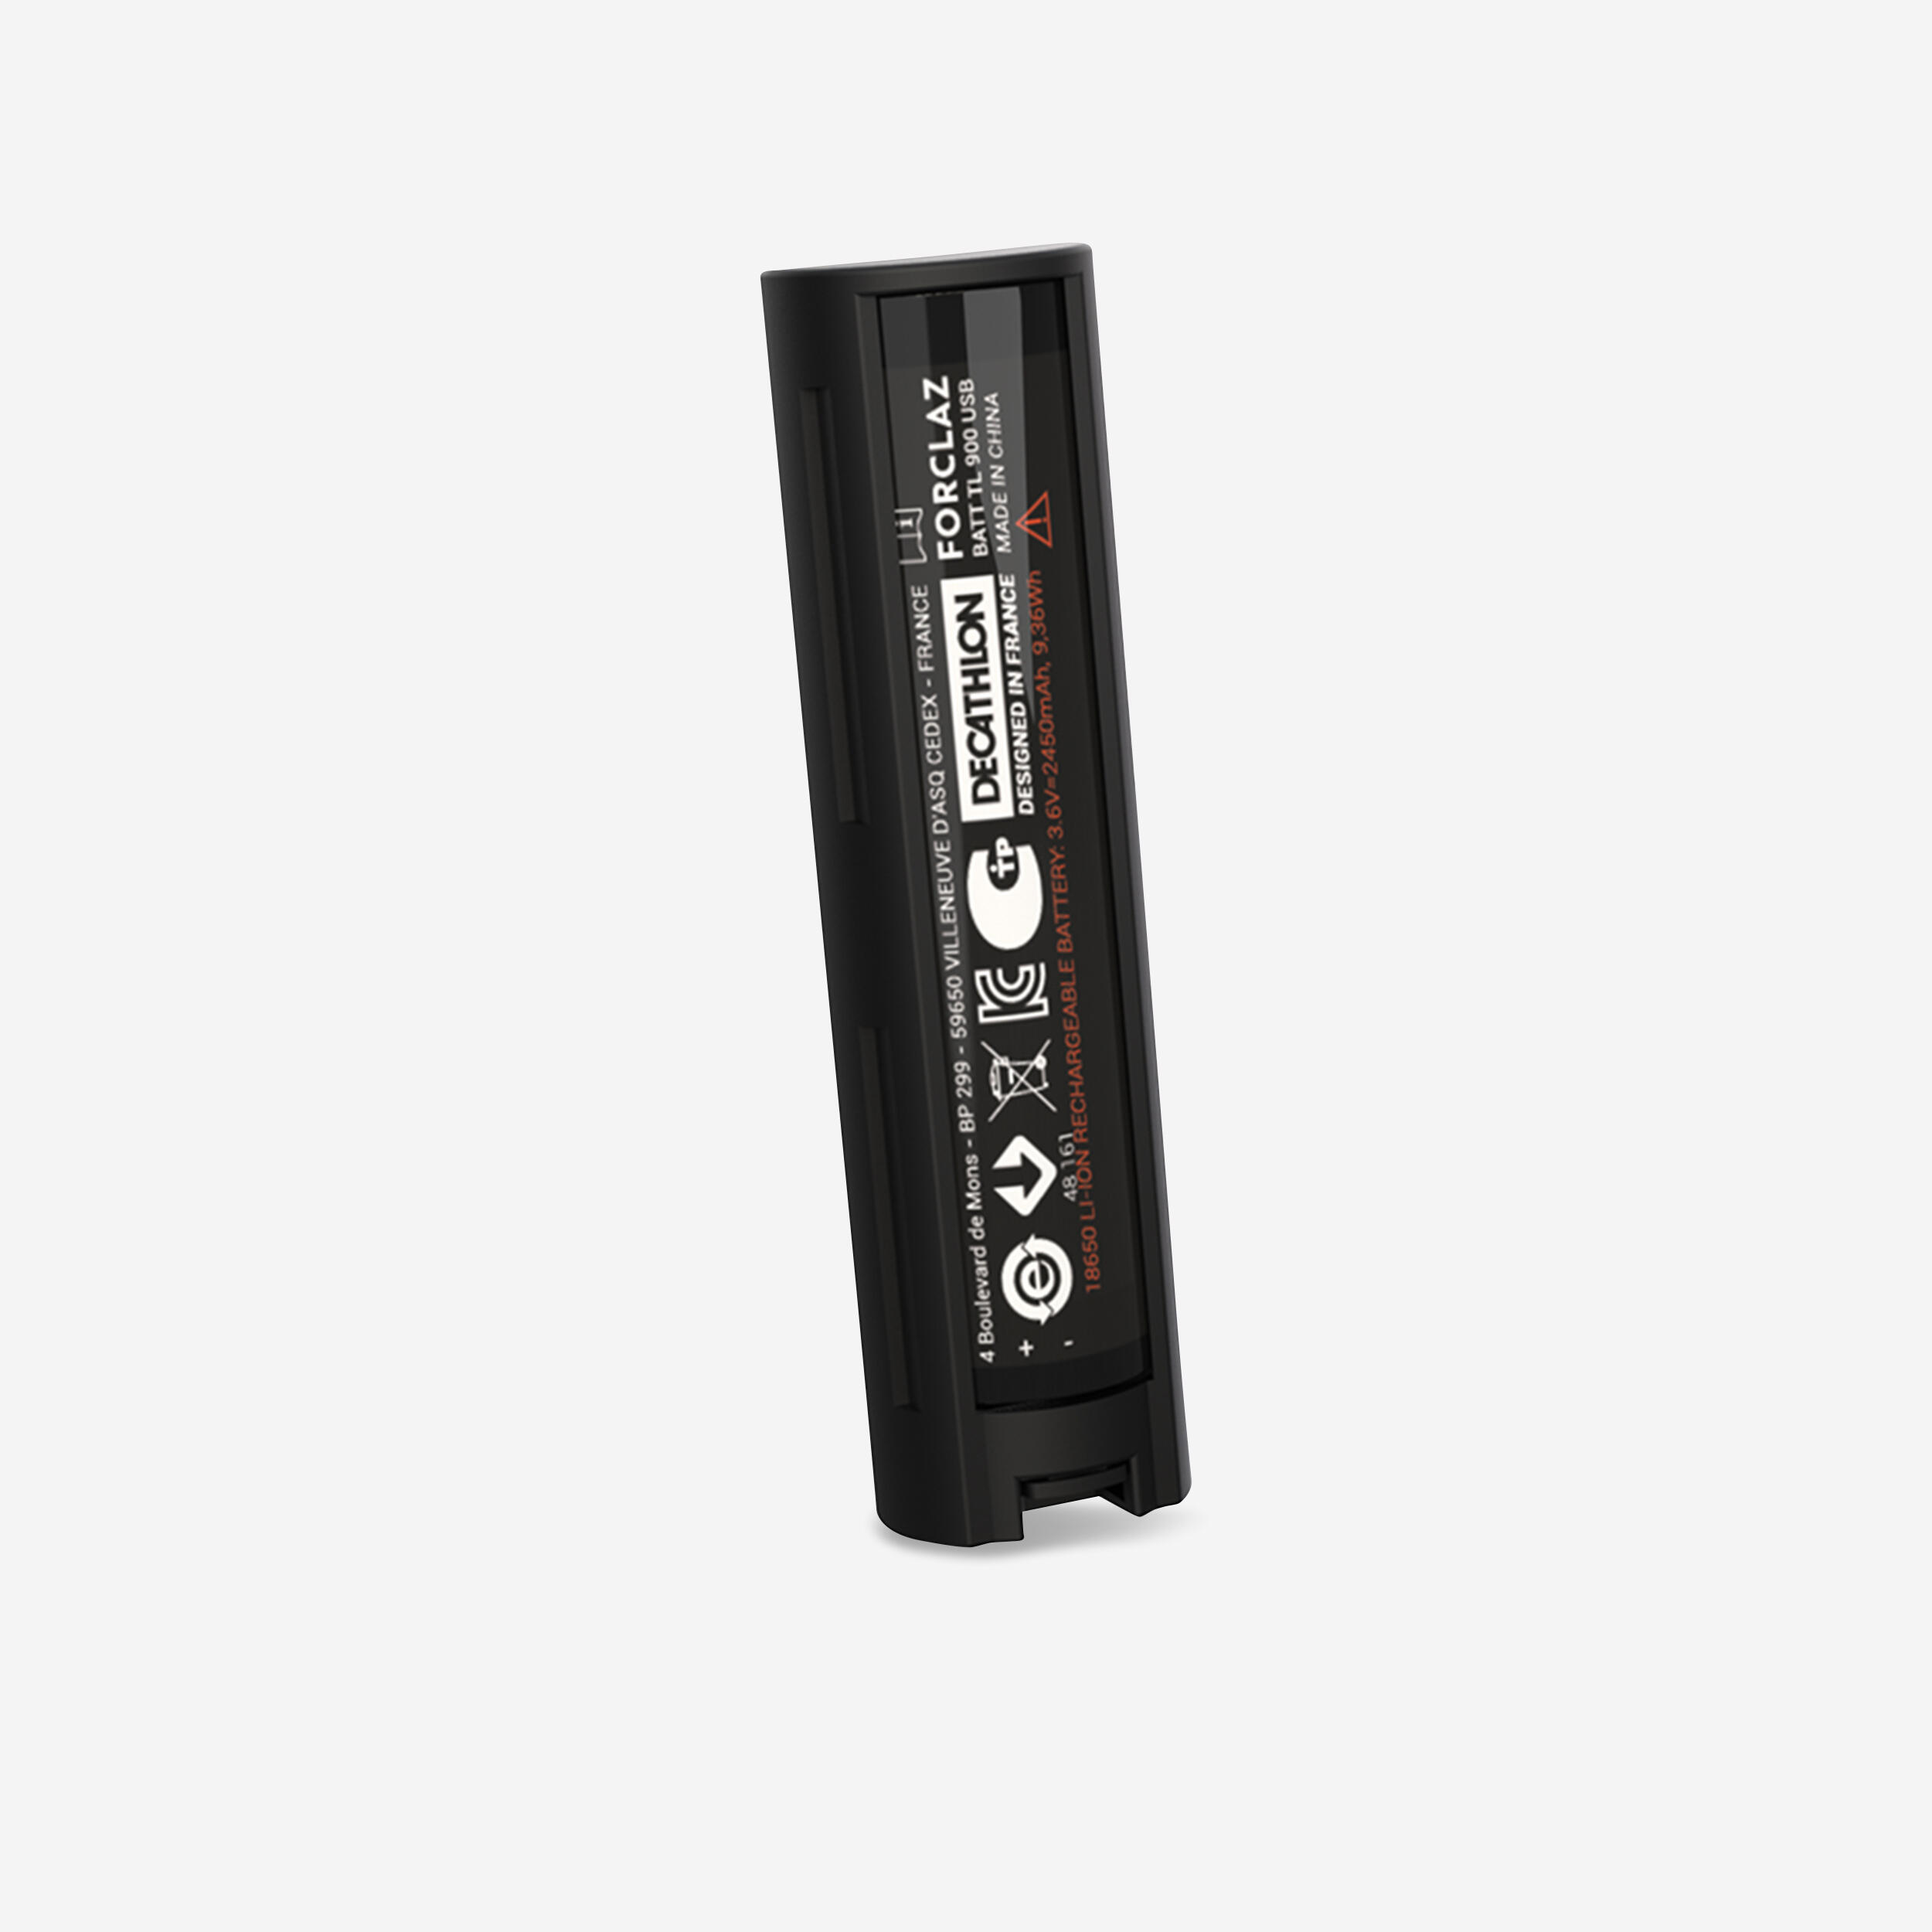 Forclaz Replacement Torchlight Battery - 2.450 Mah Tl900